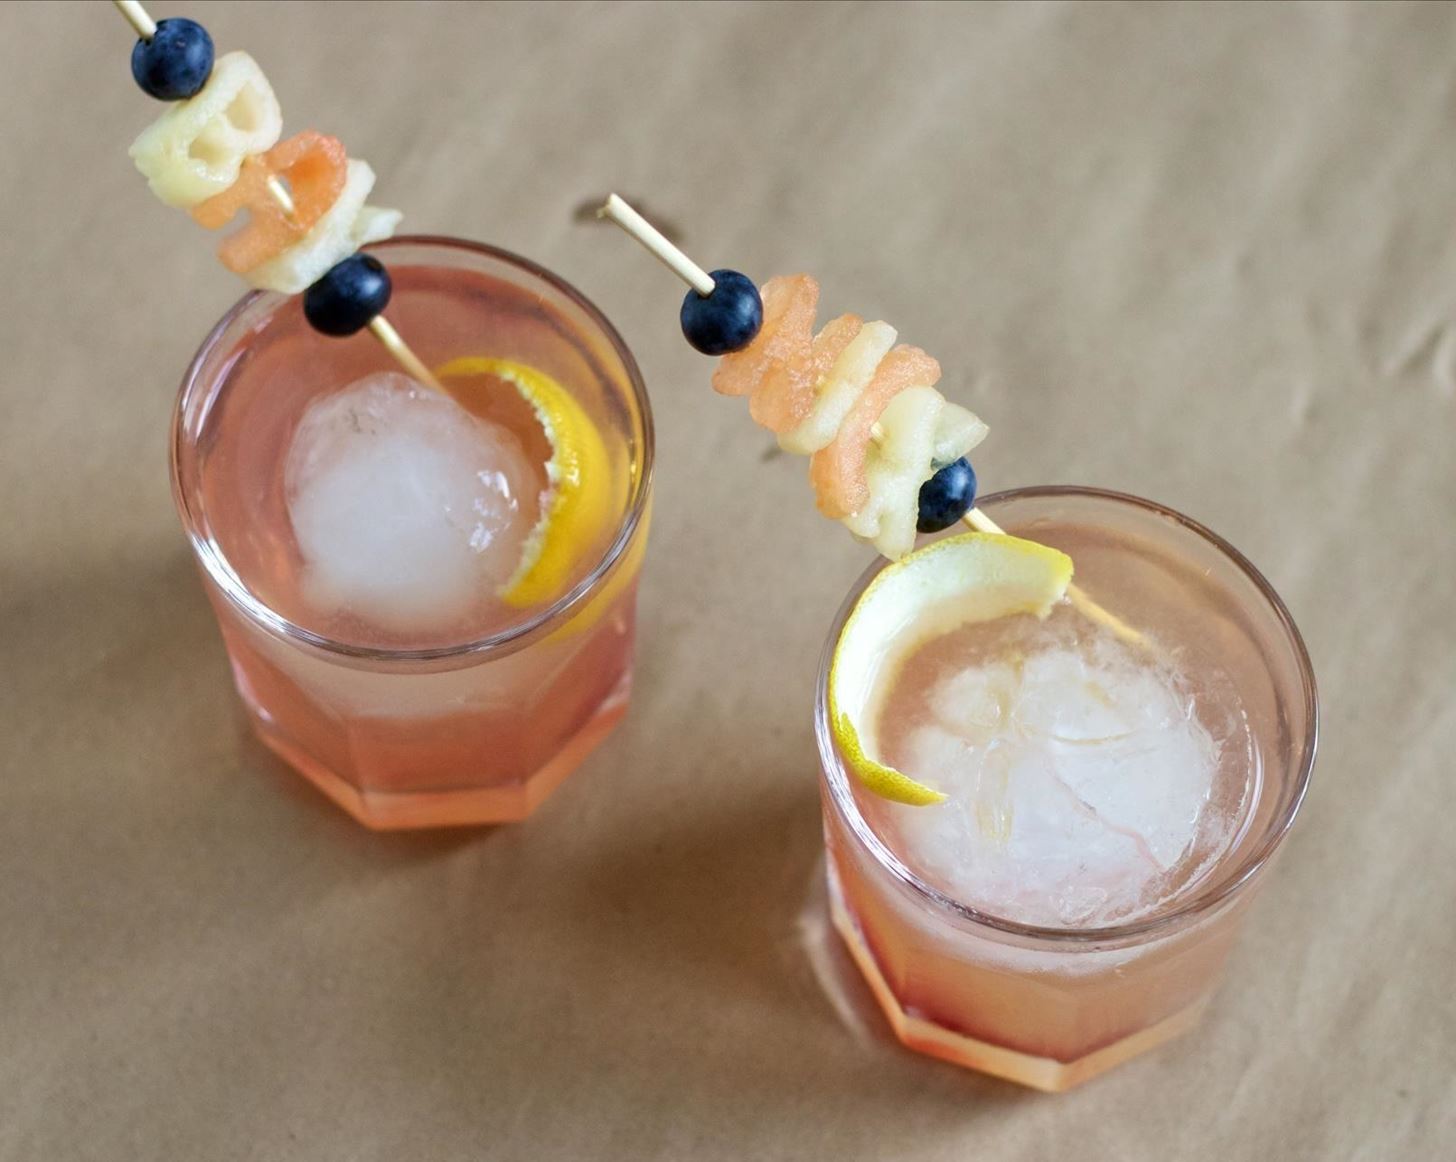 These Edible Name Tags Are a Fun Way to Keep Track of Your Drink